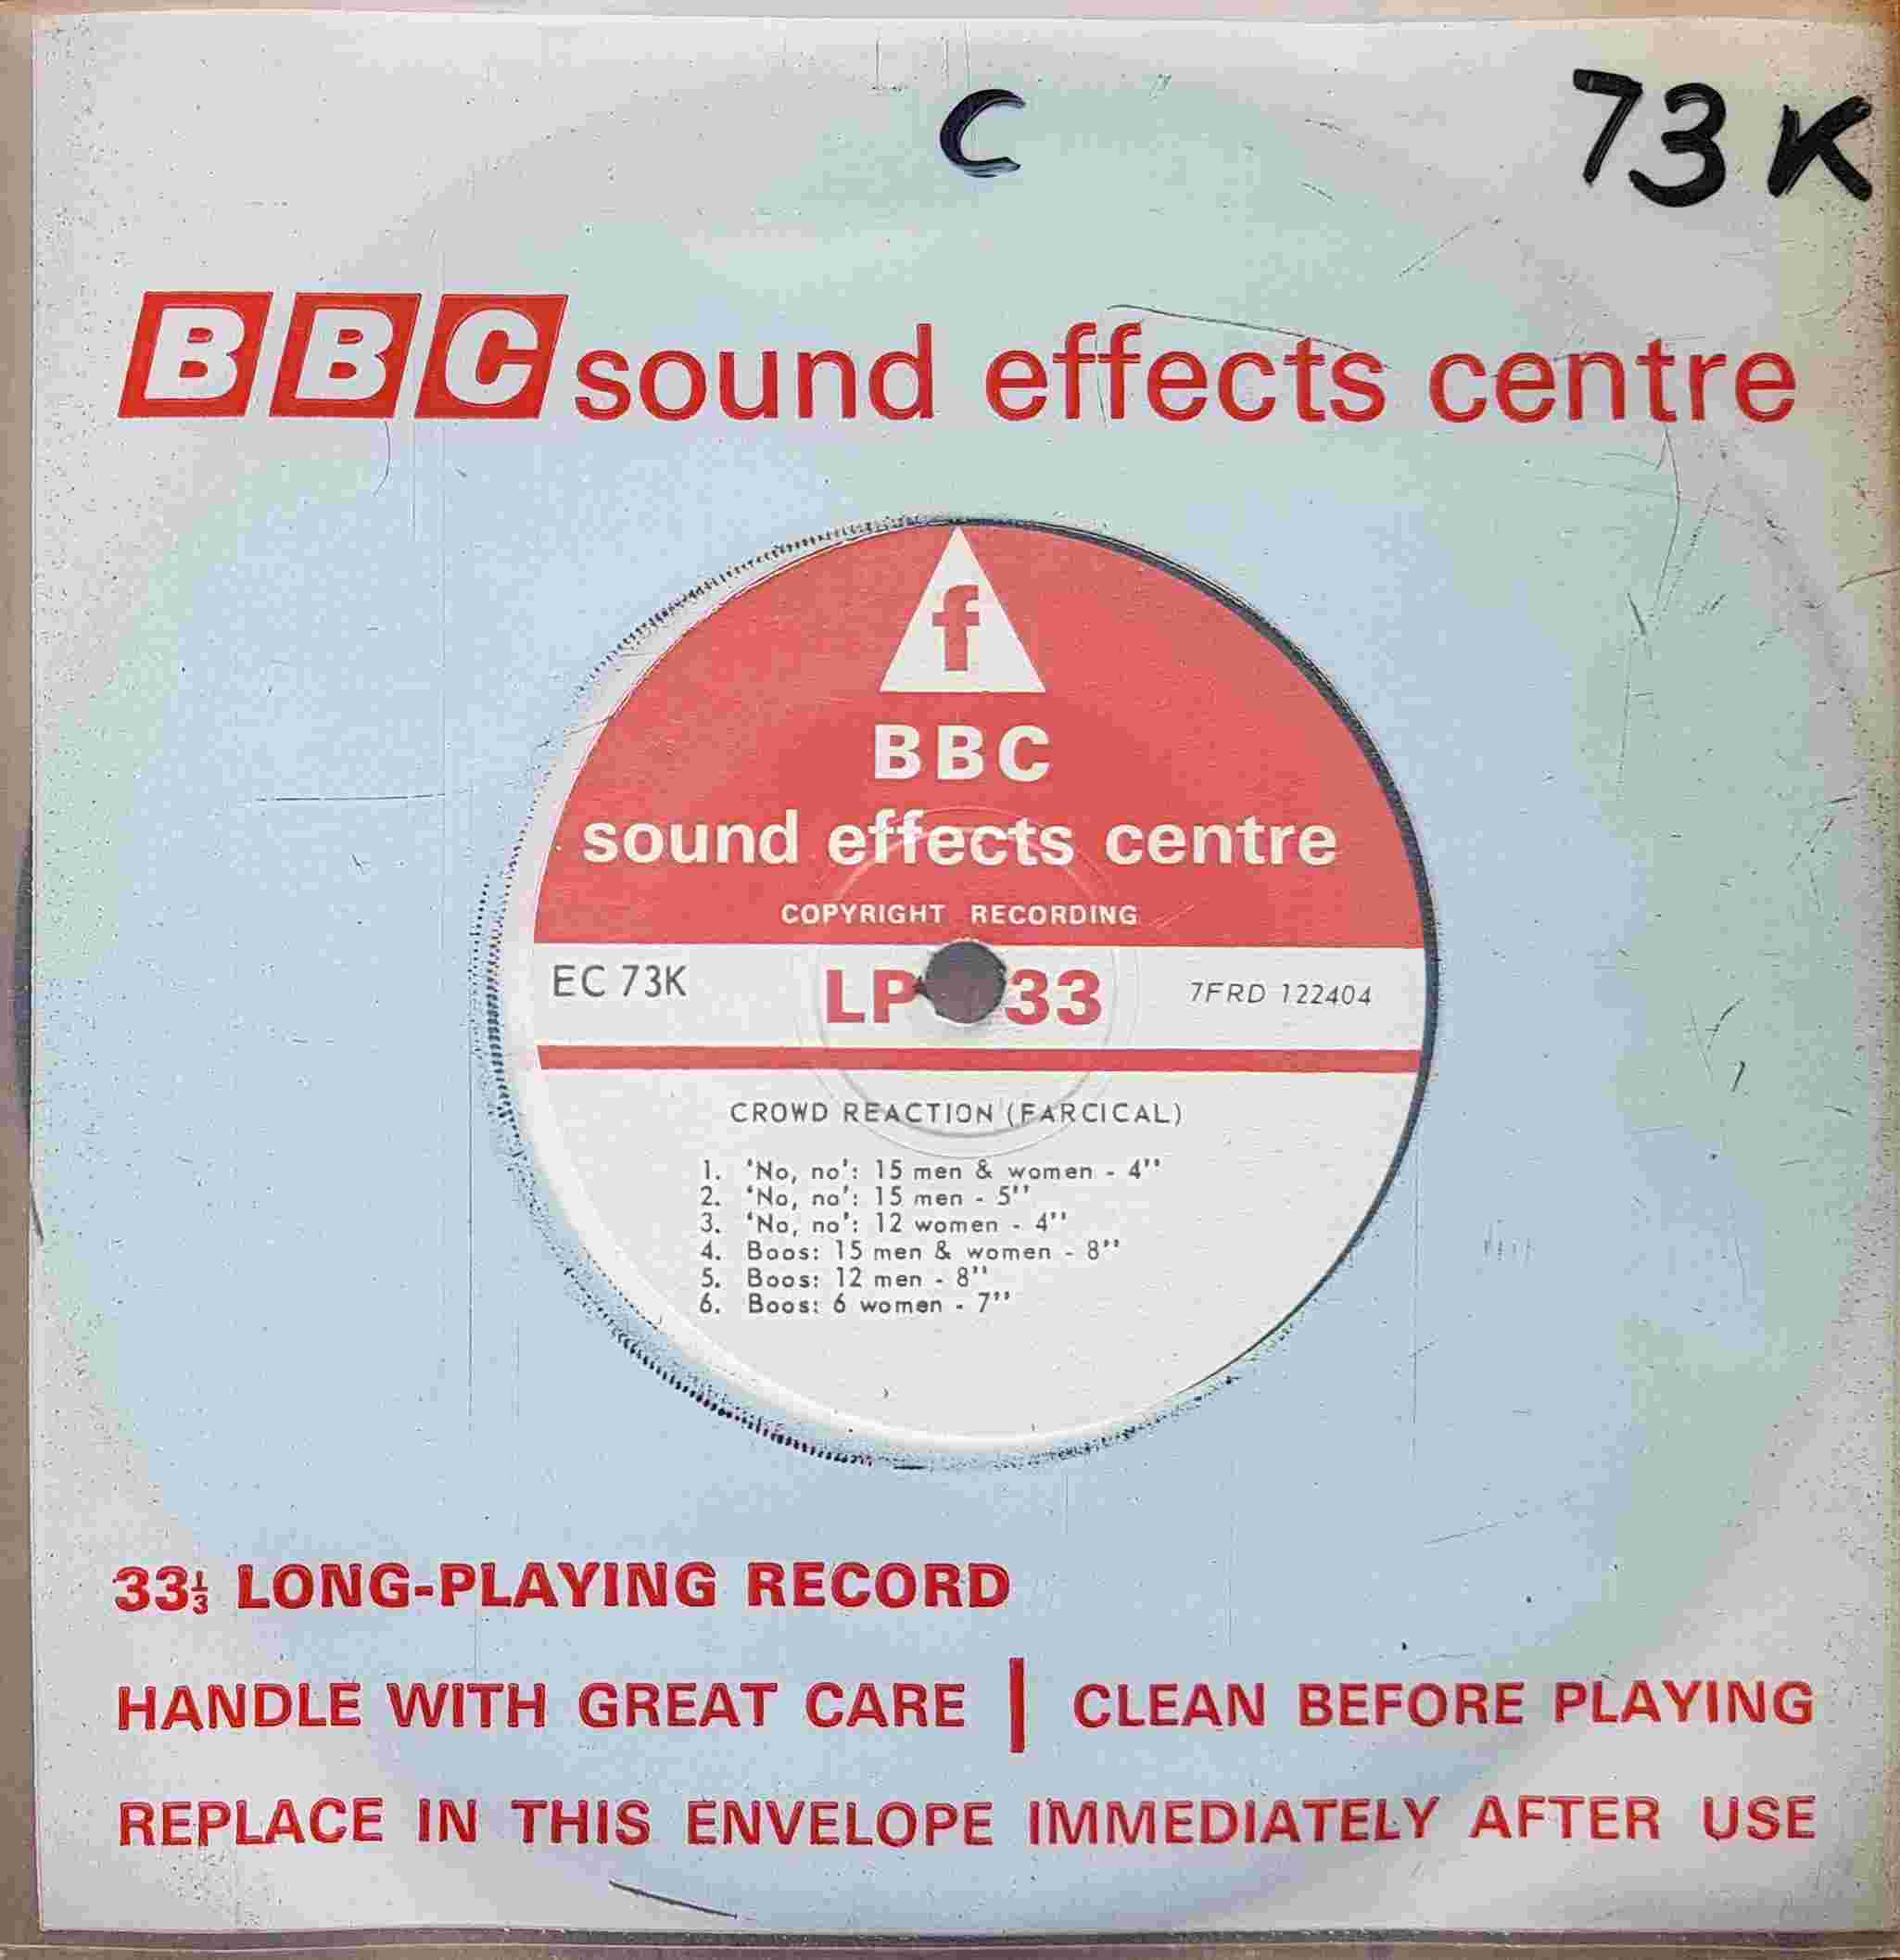 Picture of EC 73K Crowd reaction / Chatter (Farcical) by artist Not registered from the BBC singles - Records and Tapes library